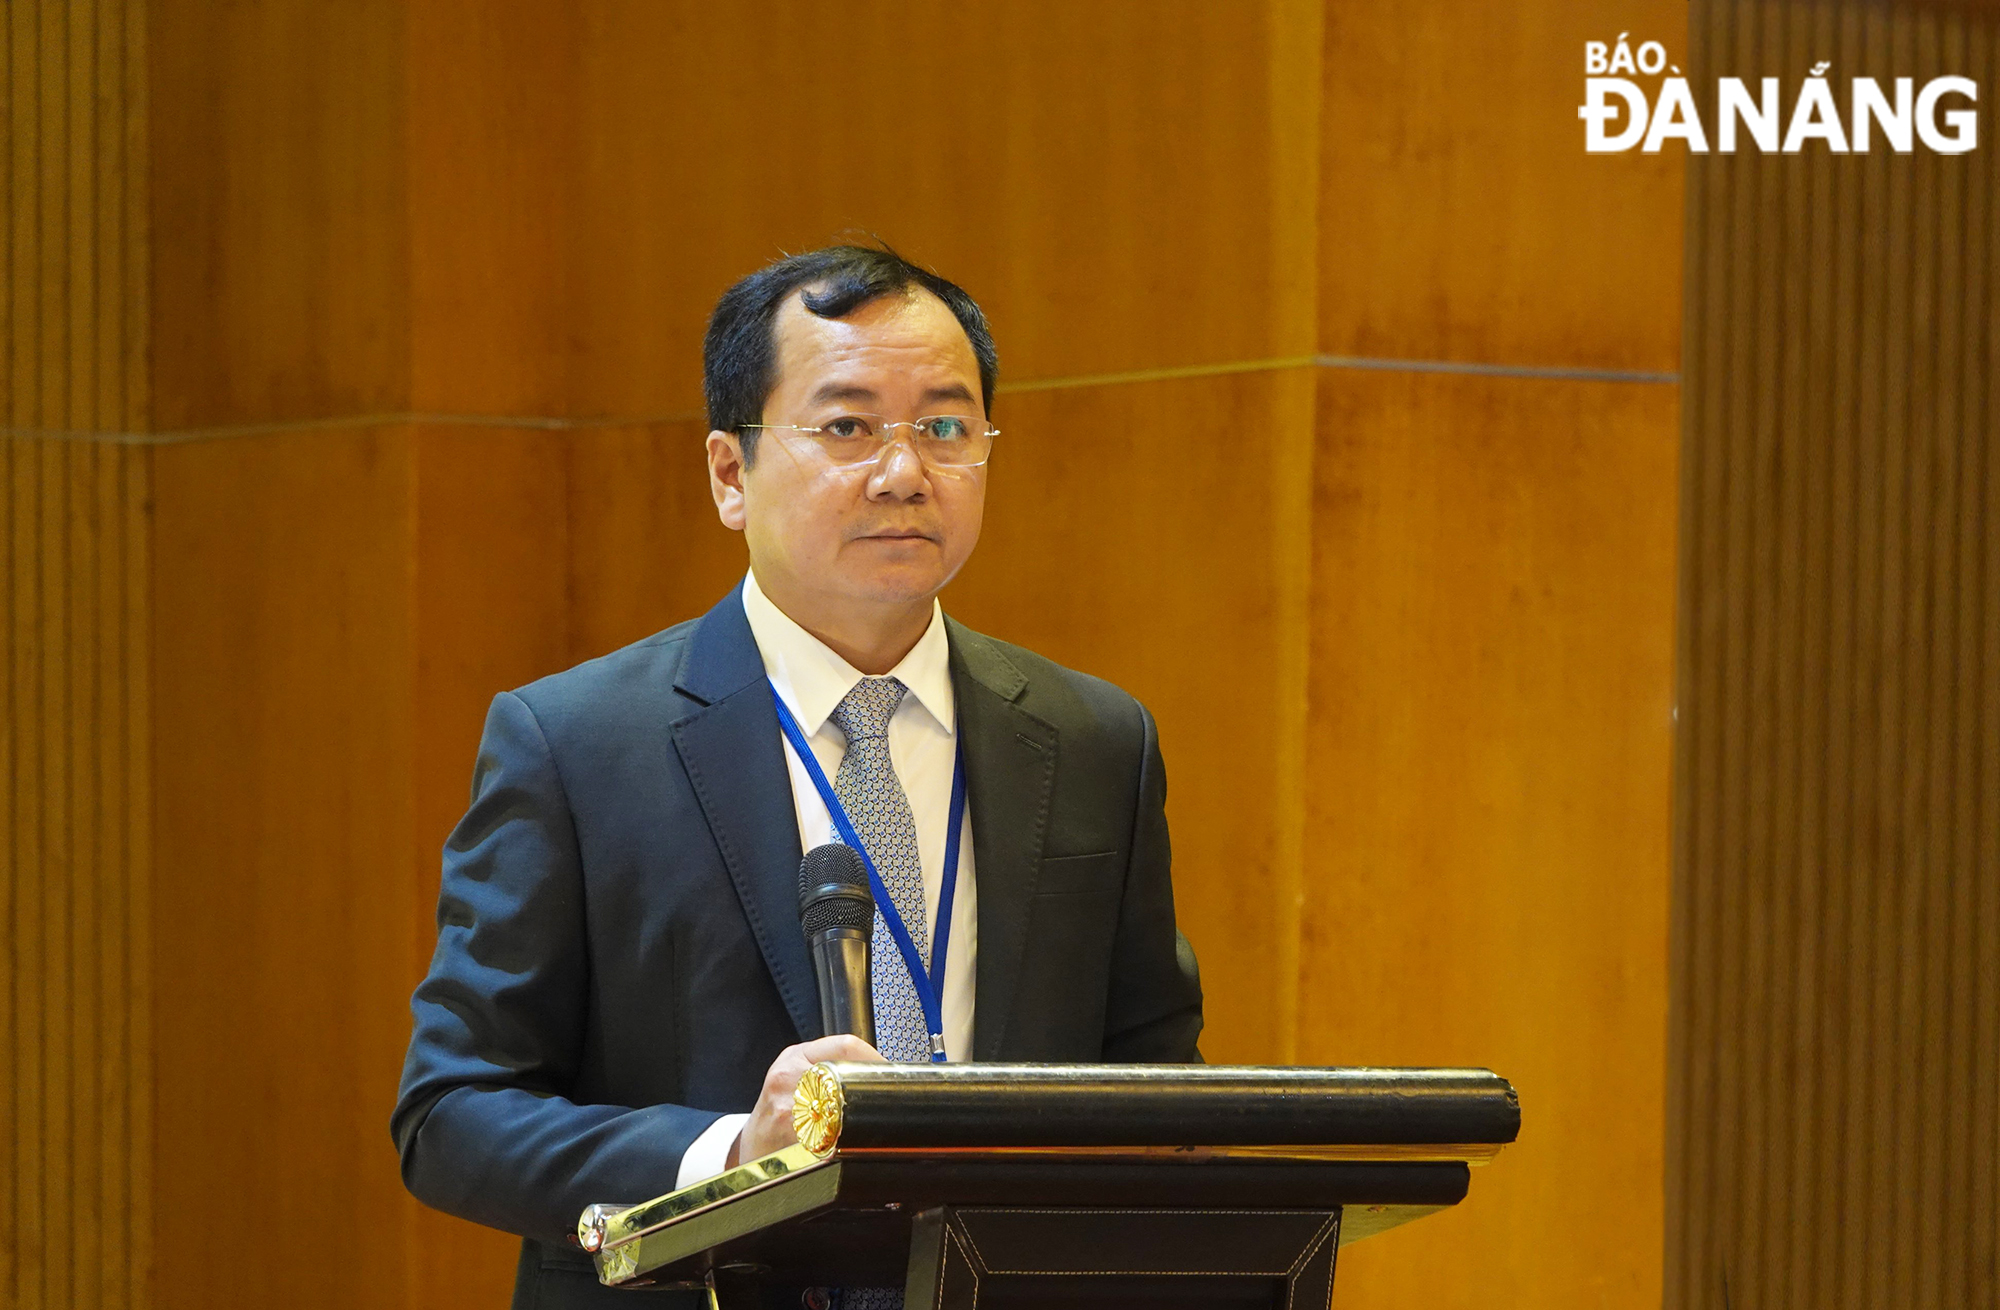 Director General of the Directorate of Fisheries Tran Dinh Luan delivering his opening speech to the 19th annual meeting of WCPFC on Monday morning. Photo: VAN HOANG